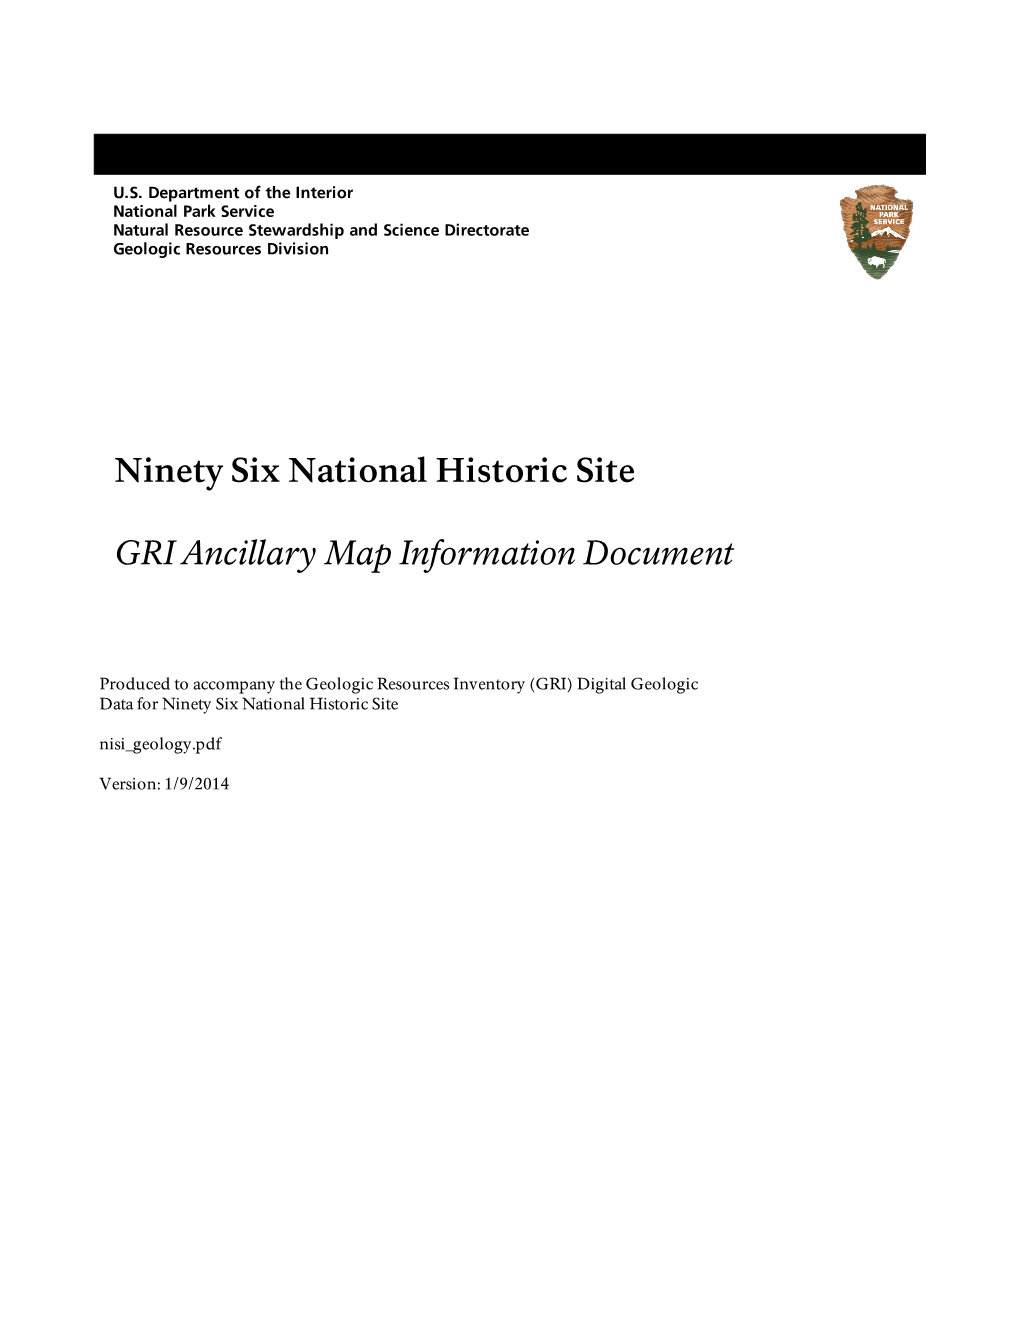 Geologic Resources Inventory Map Document for Ninety Six National Historic Site